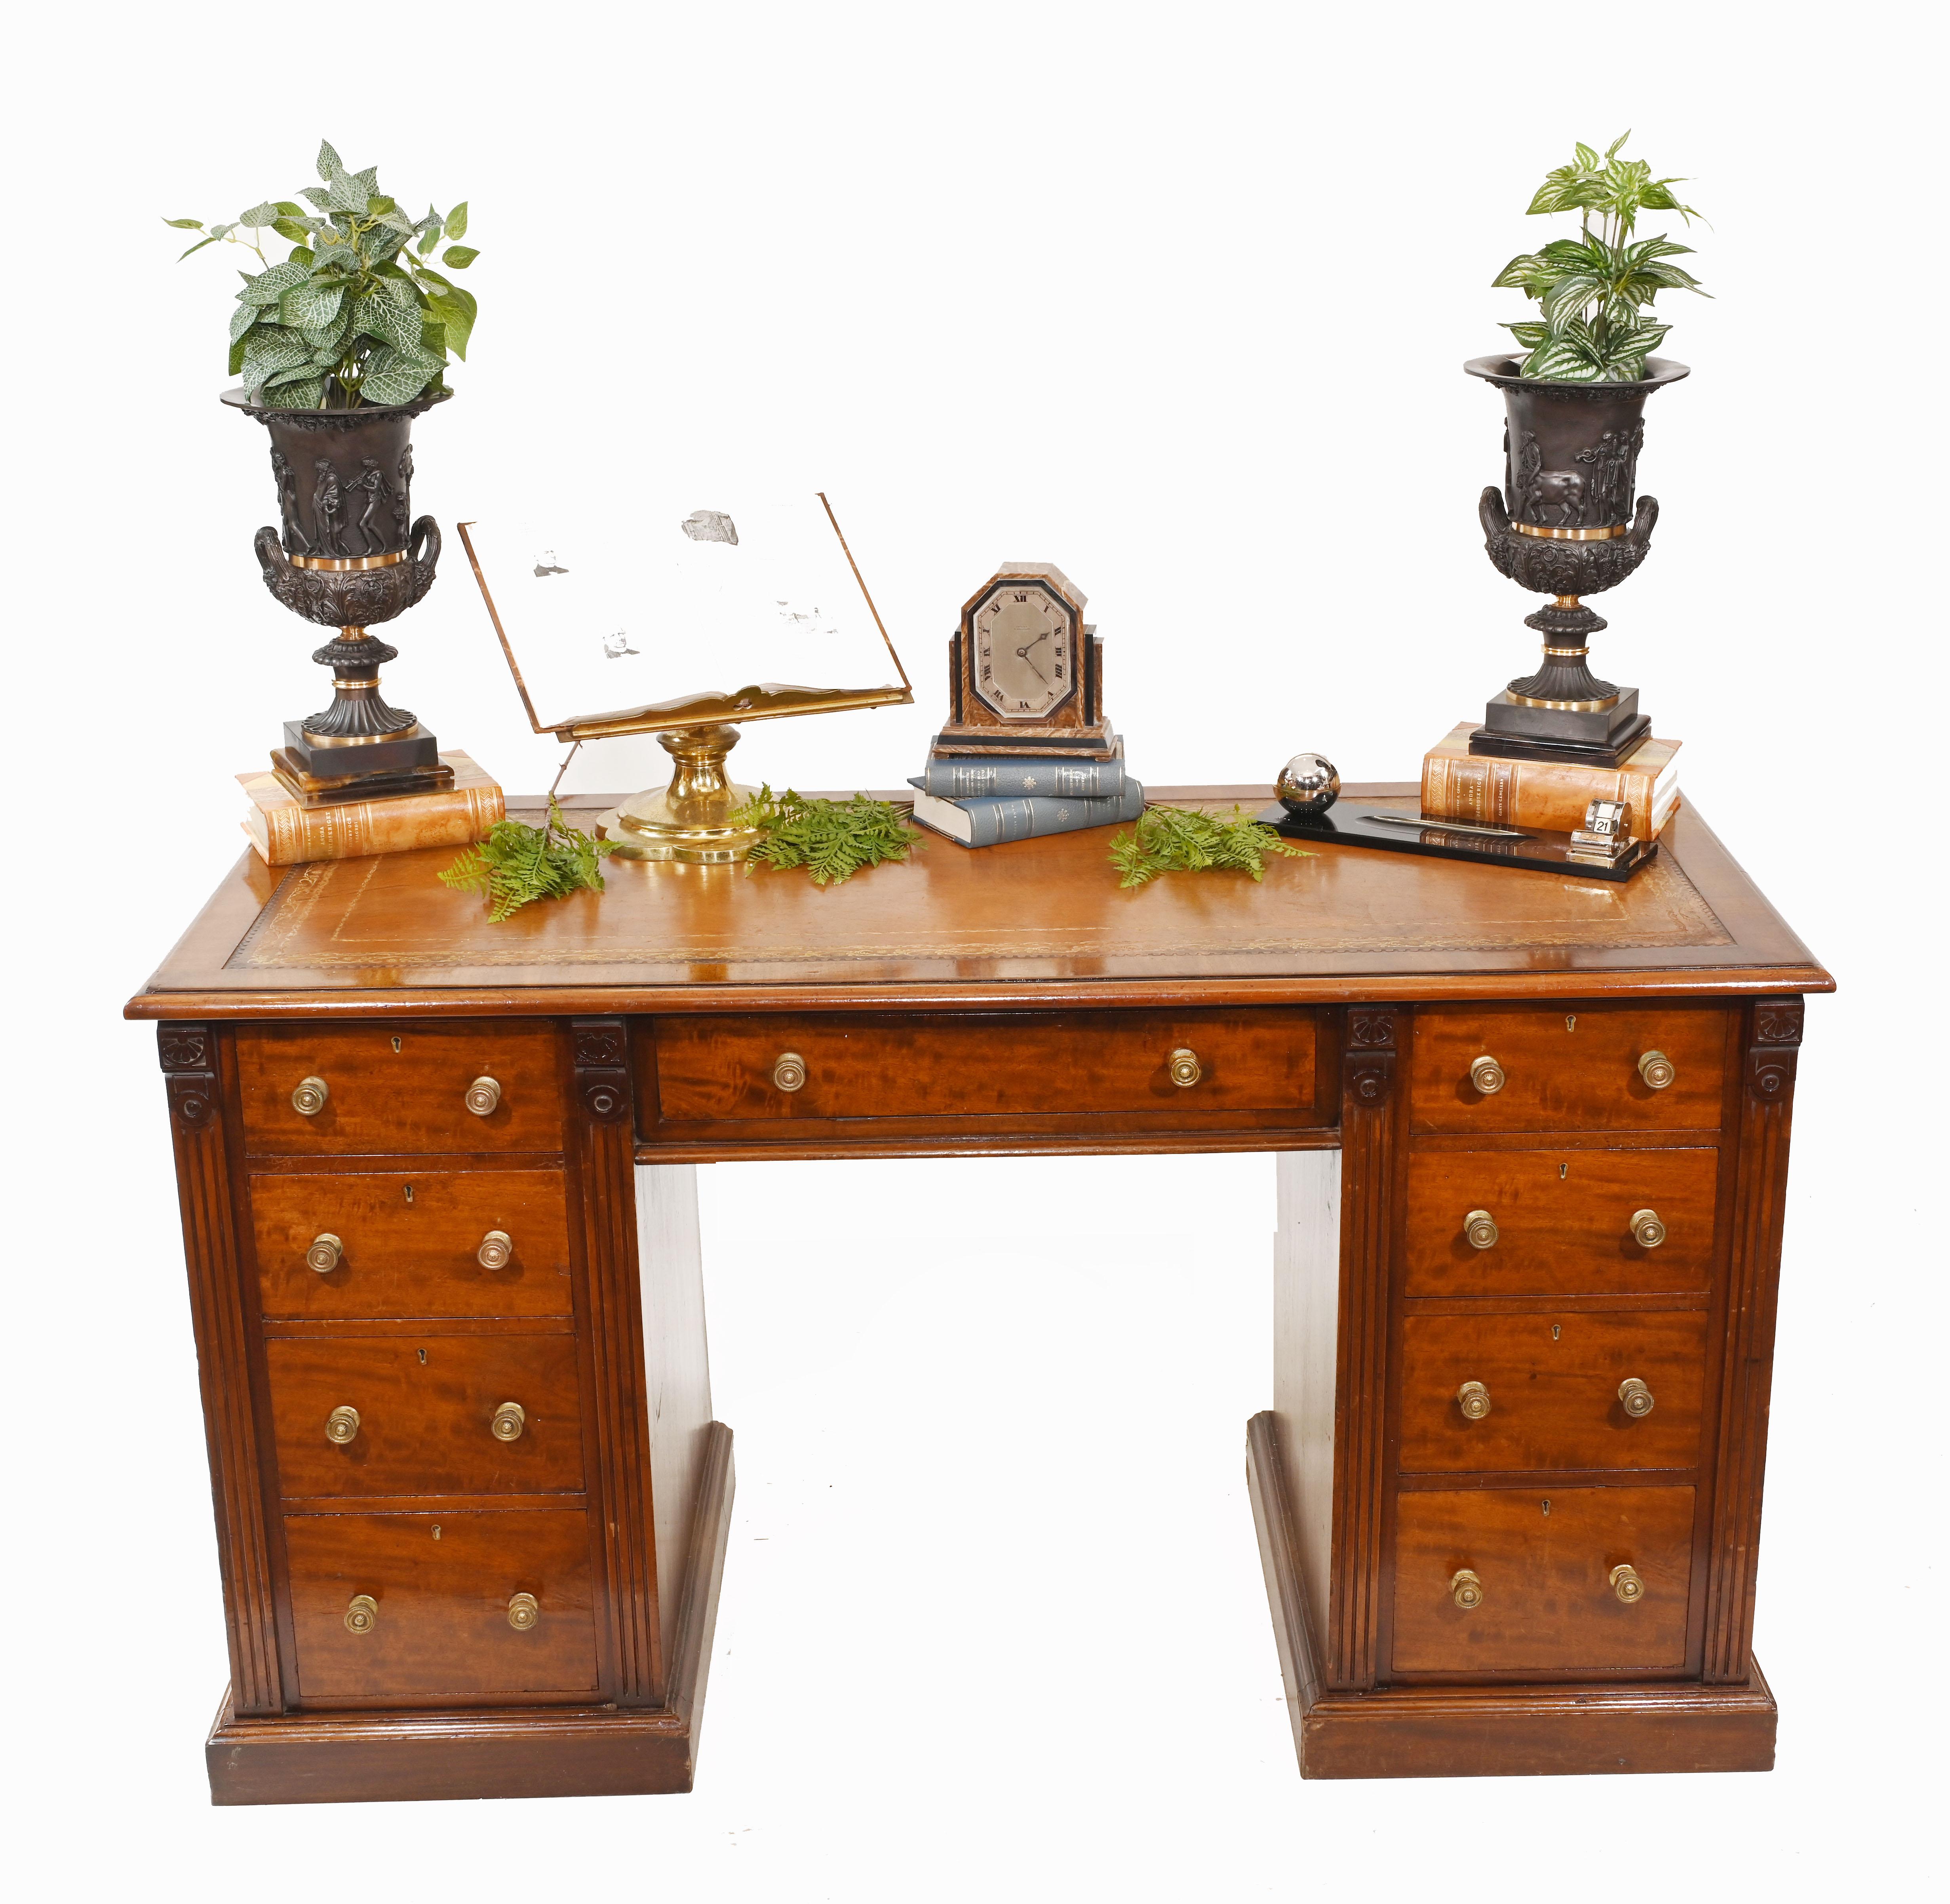 Gorgeous Edwardian pedestal desk in mahogany
Clean and minimal design and we date to circa 1910
Bought from a dealer on London's Fulham Road
Some of our items are in storage so please check ahead of a viewing to see if it is on our shop